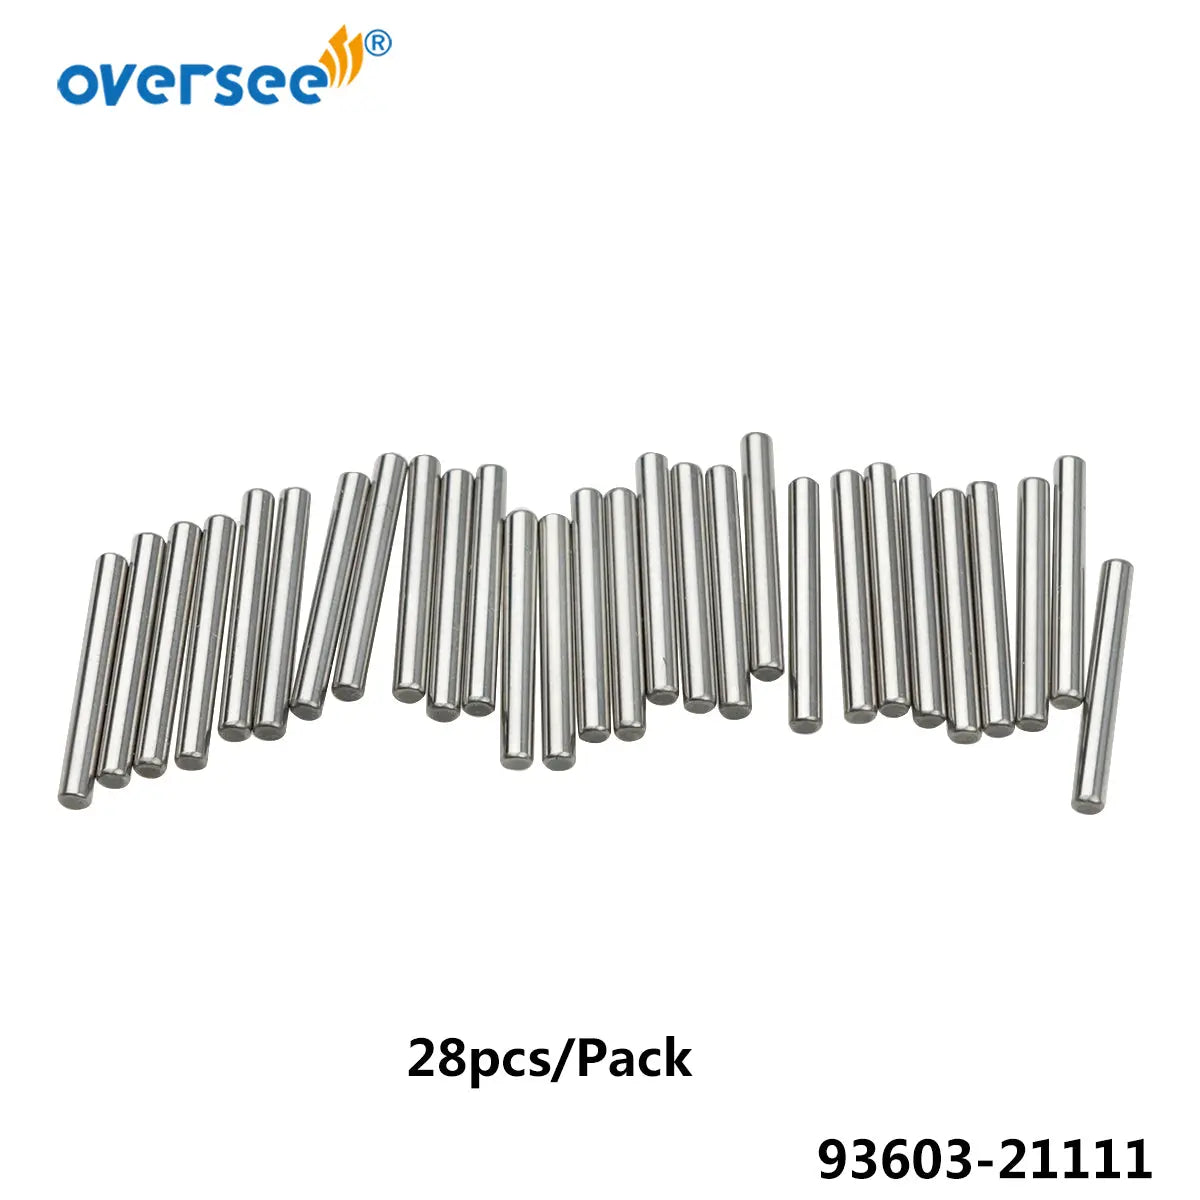 Oversee Marine 93603-21111-00 Bearing Needle 28pcs/Pack Replacement For Yamaha 85-90-115-130-150-175-200-225HP 2 Stroke Outboard Engine Top Real